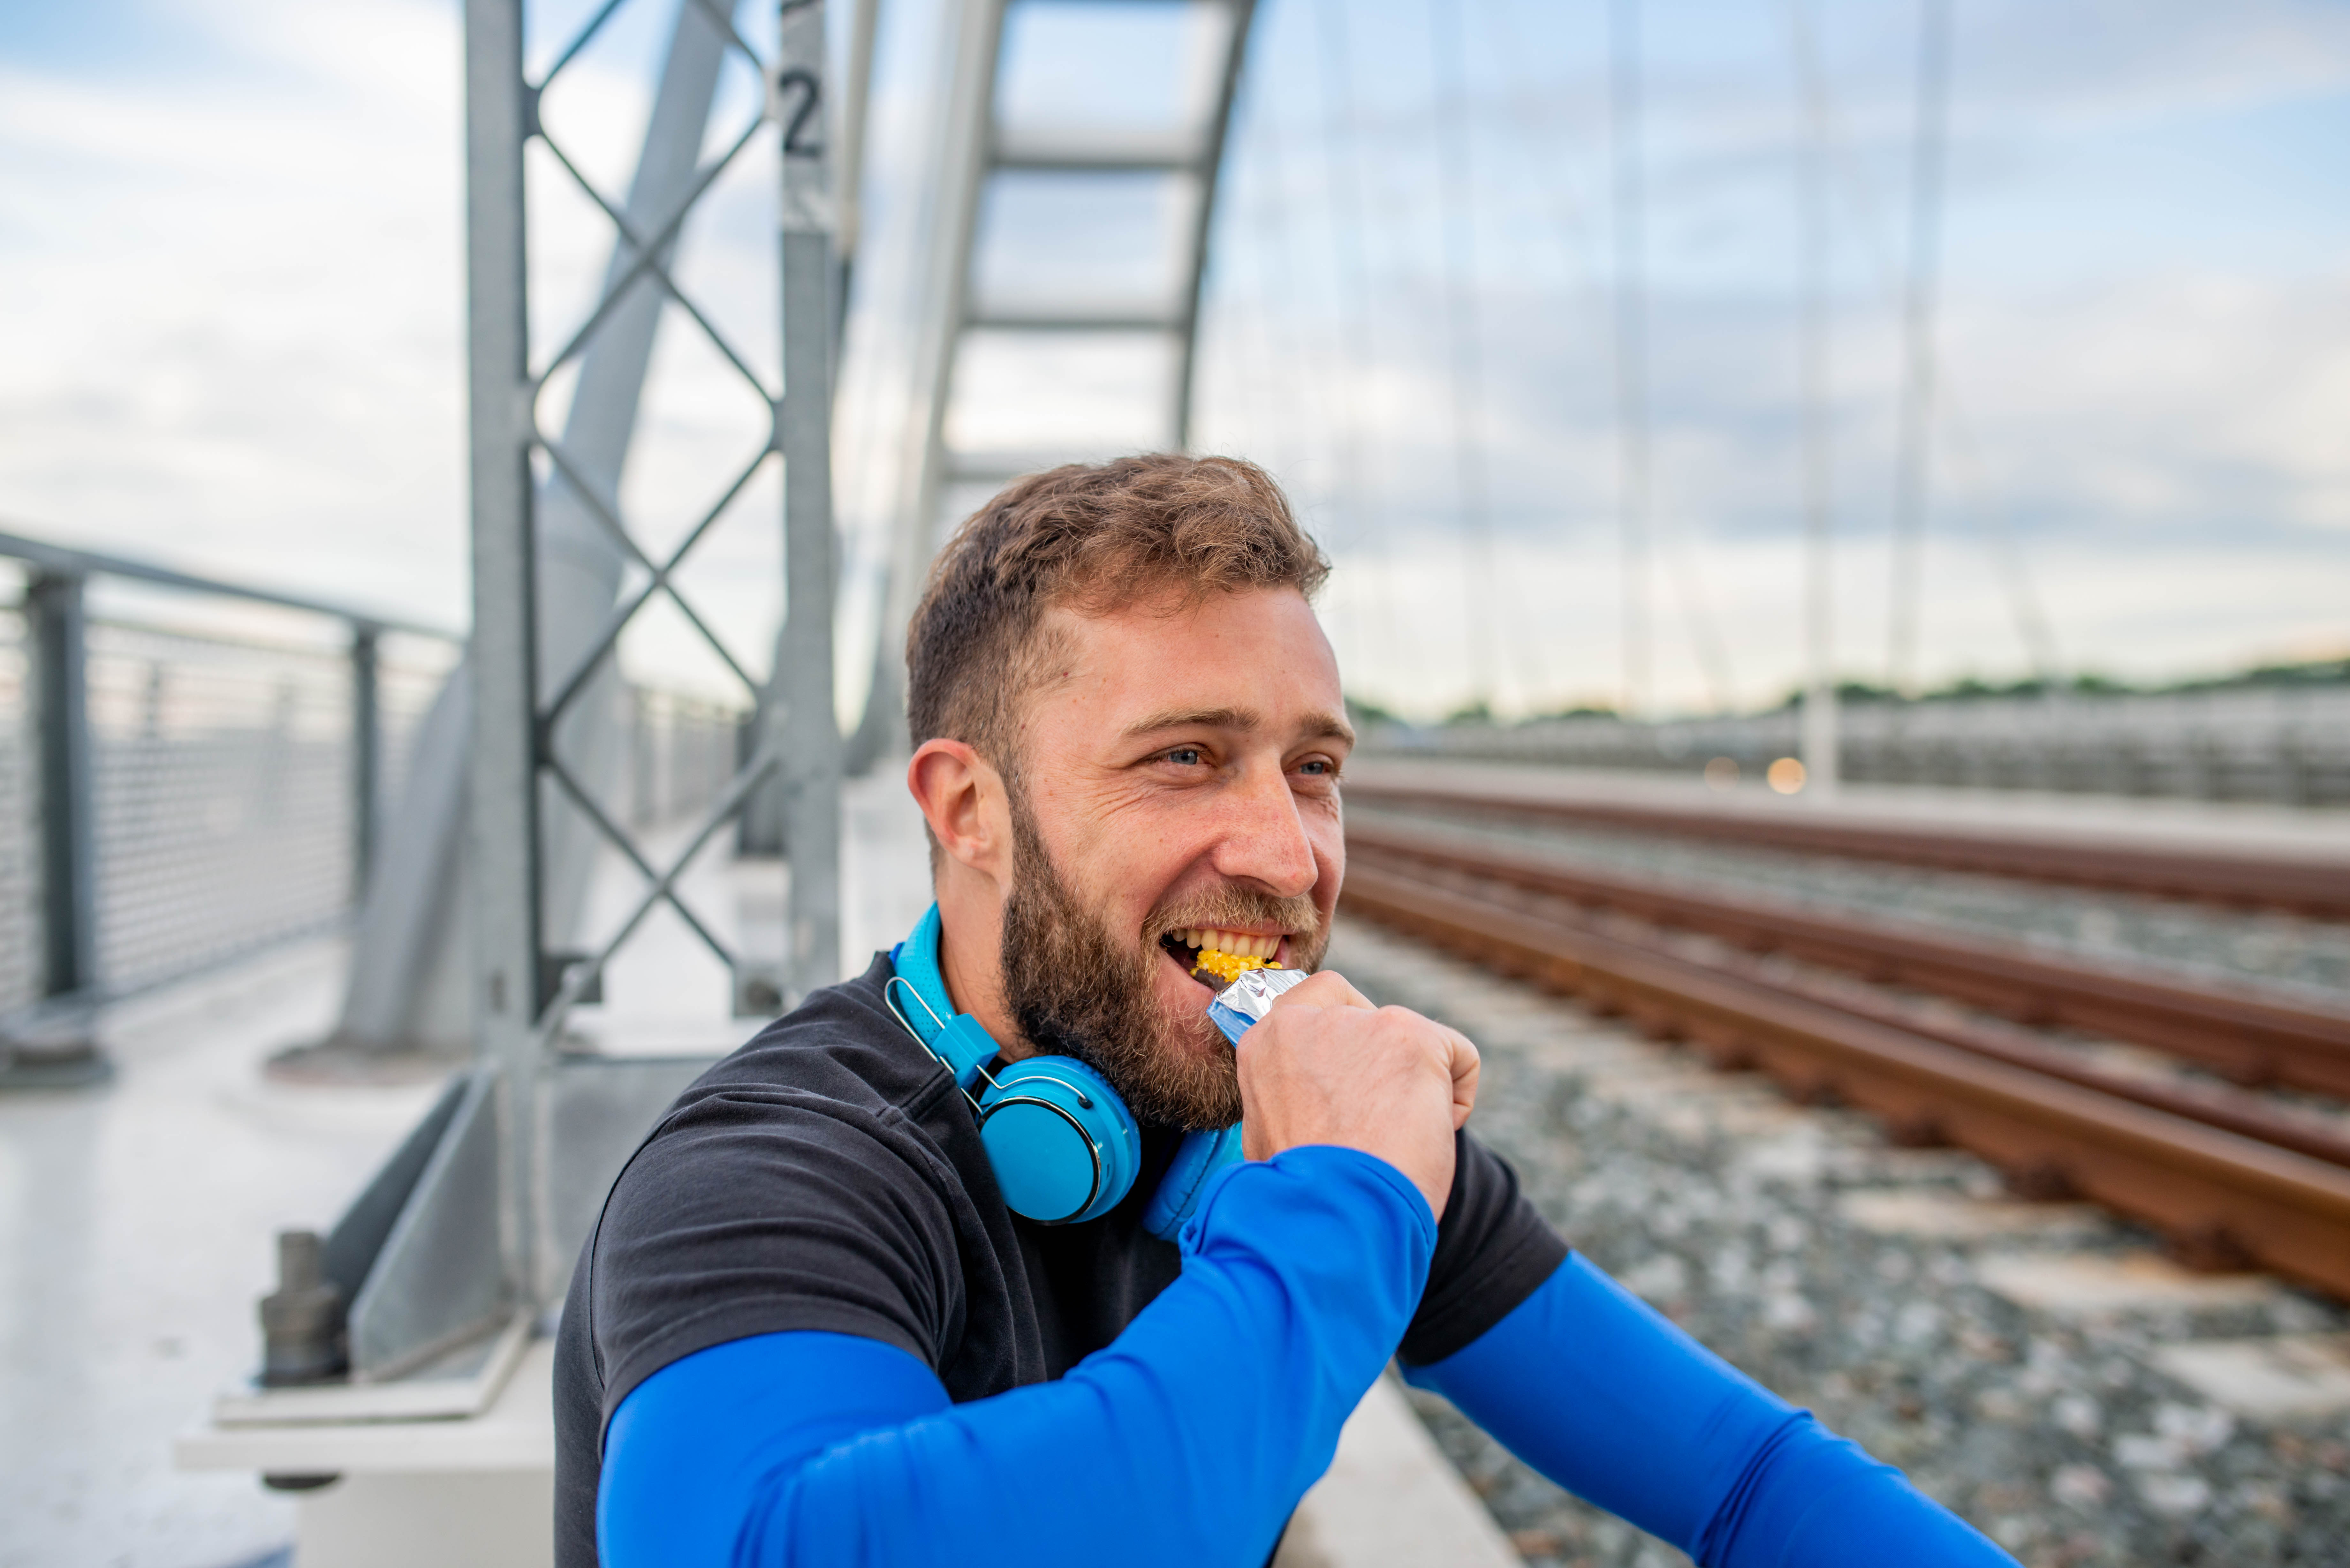 A smiling athlete with a beard eating a bar of chocolate after training